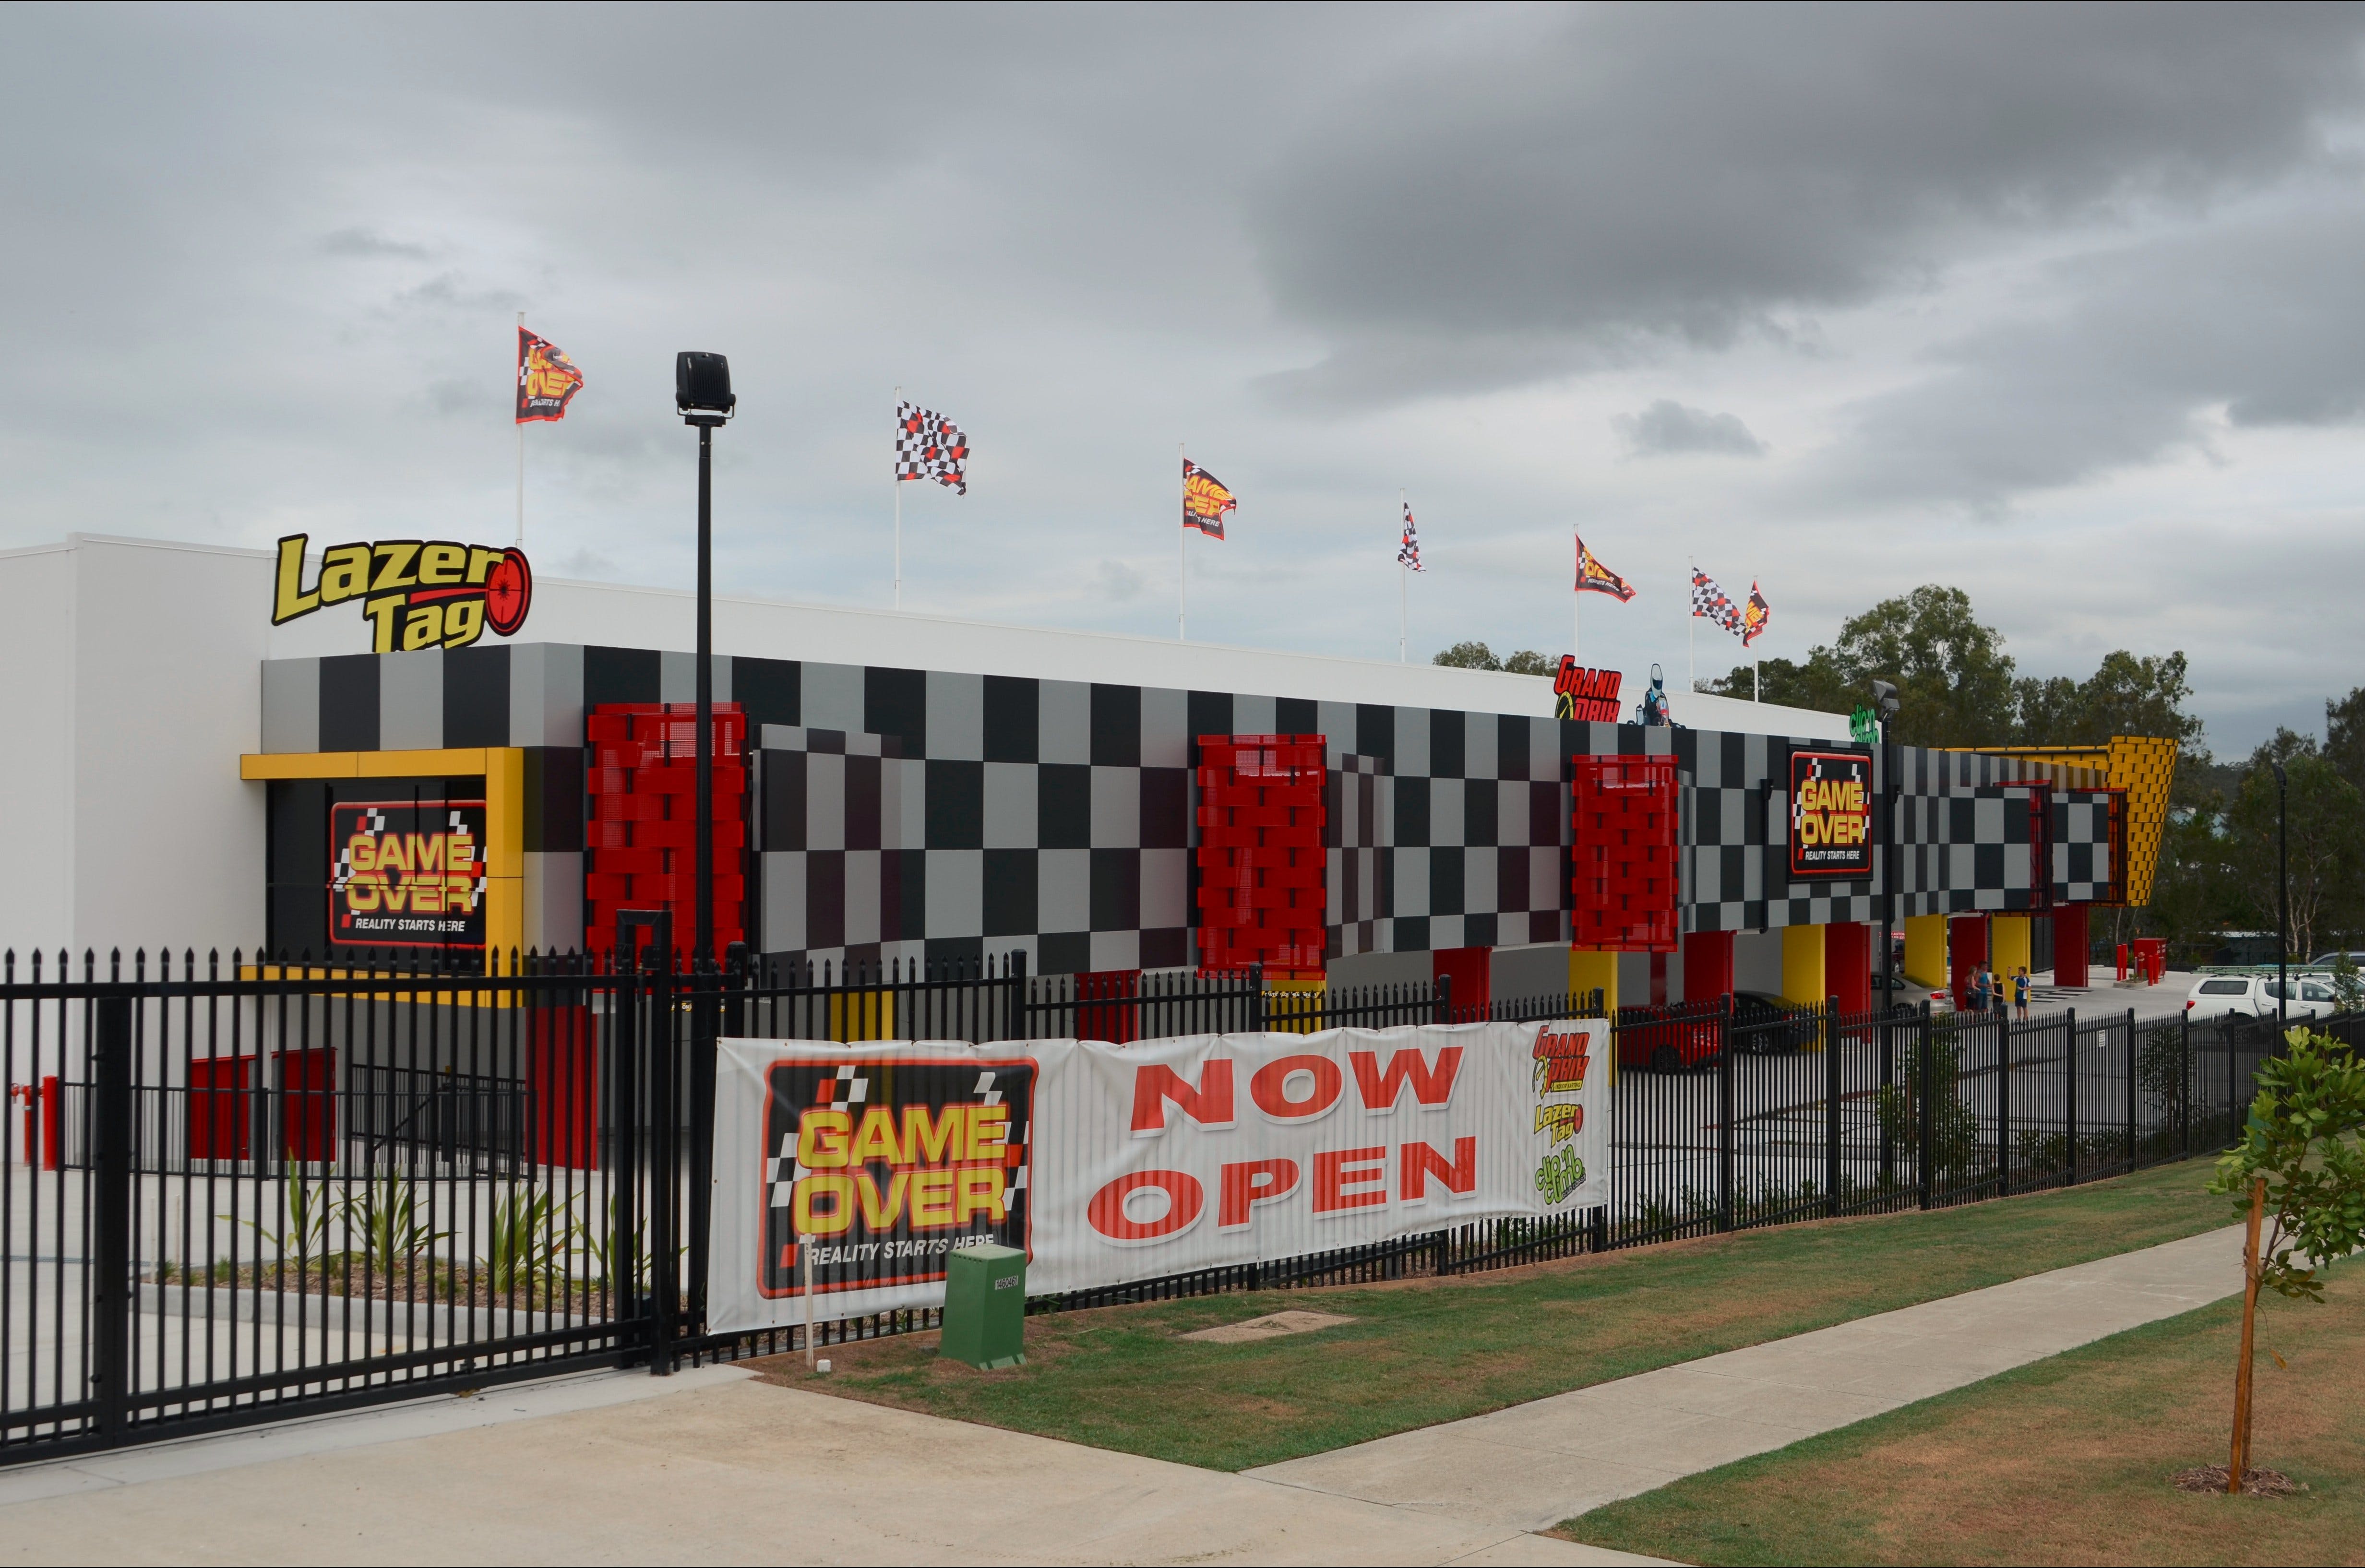 Game Over Indoor Go Karting Adventure Climbing Walls and Lazer Tag Centre - Lightning Ridge Tourism